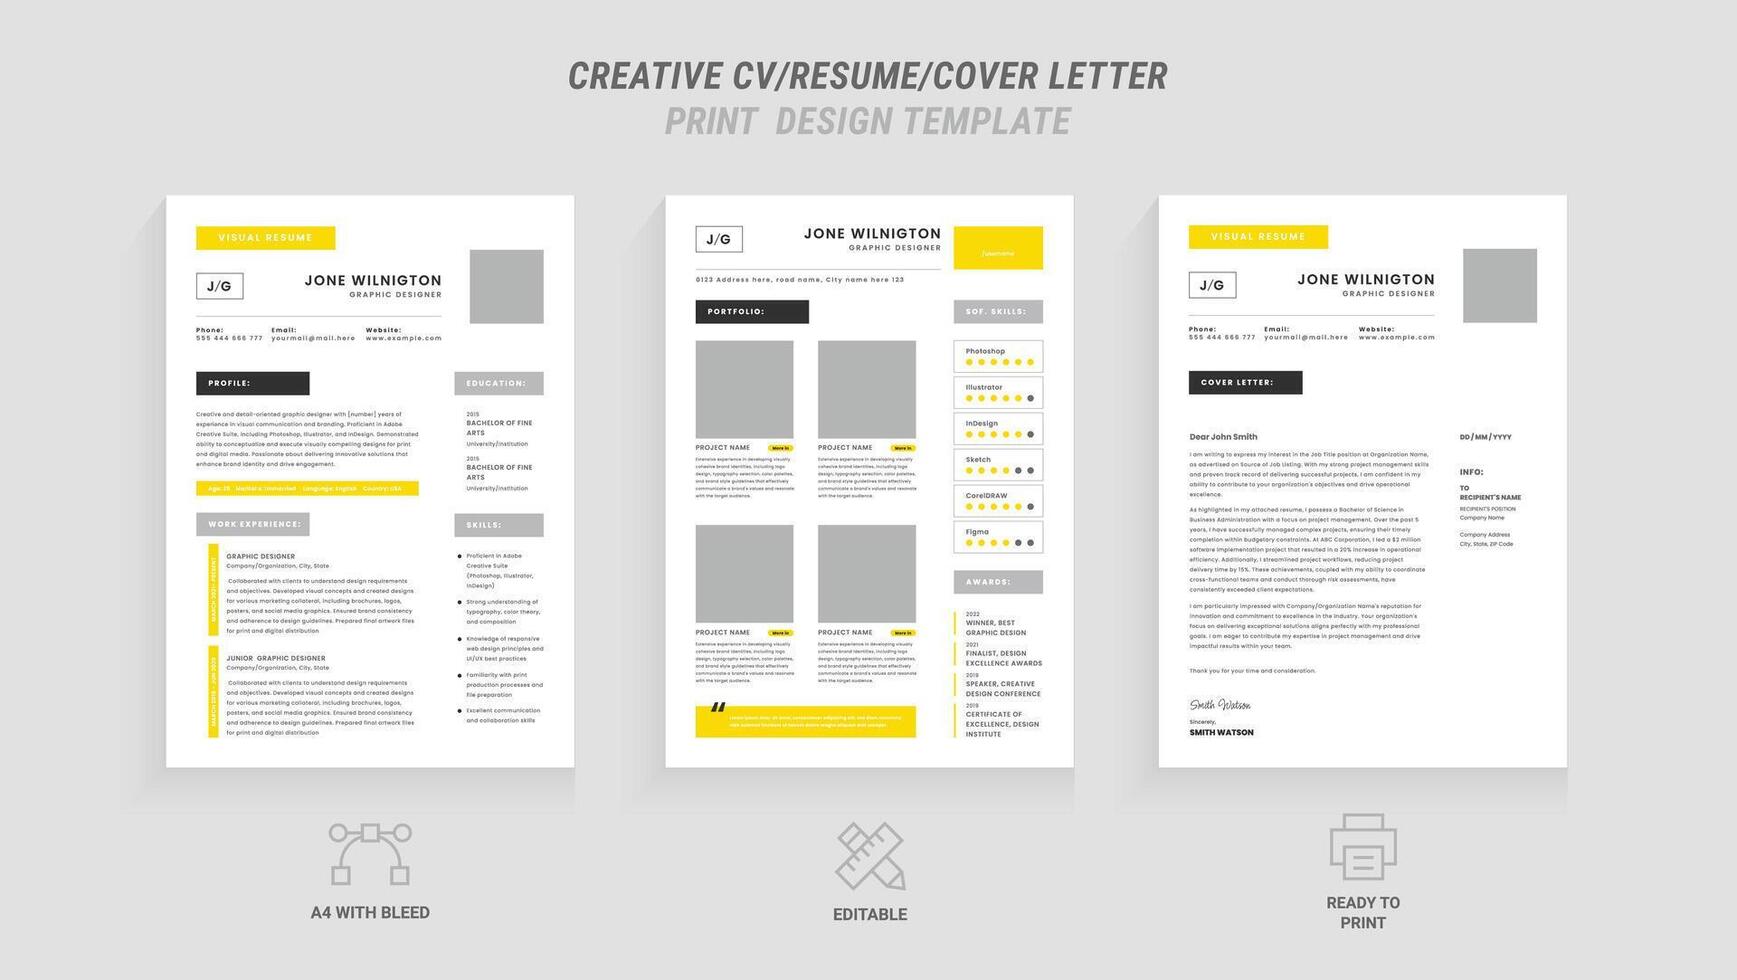 Multipurpose Clean Modern Resume, Cover Letter Design Template with Yellow Header, Ideal for Business Job Applications, Minimalist CV Layout, Vector Graphic for Professional Resume, CV Design